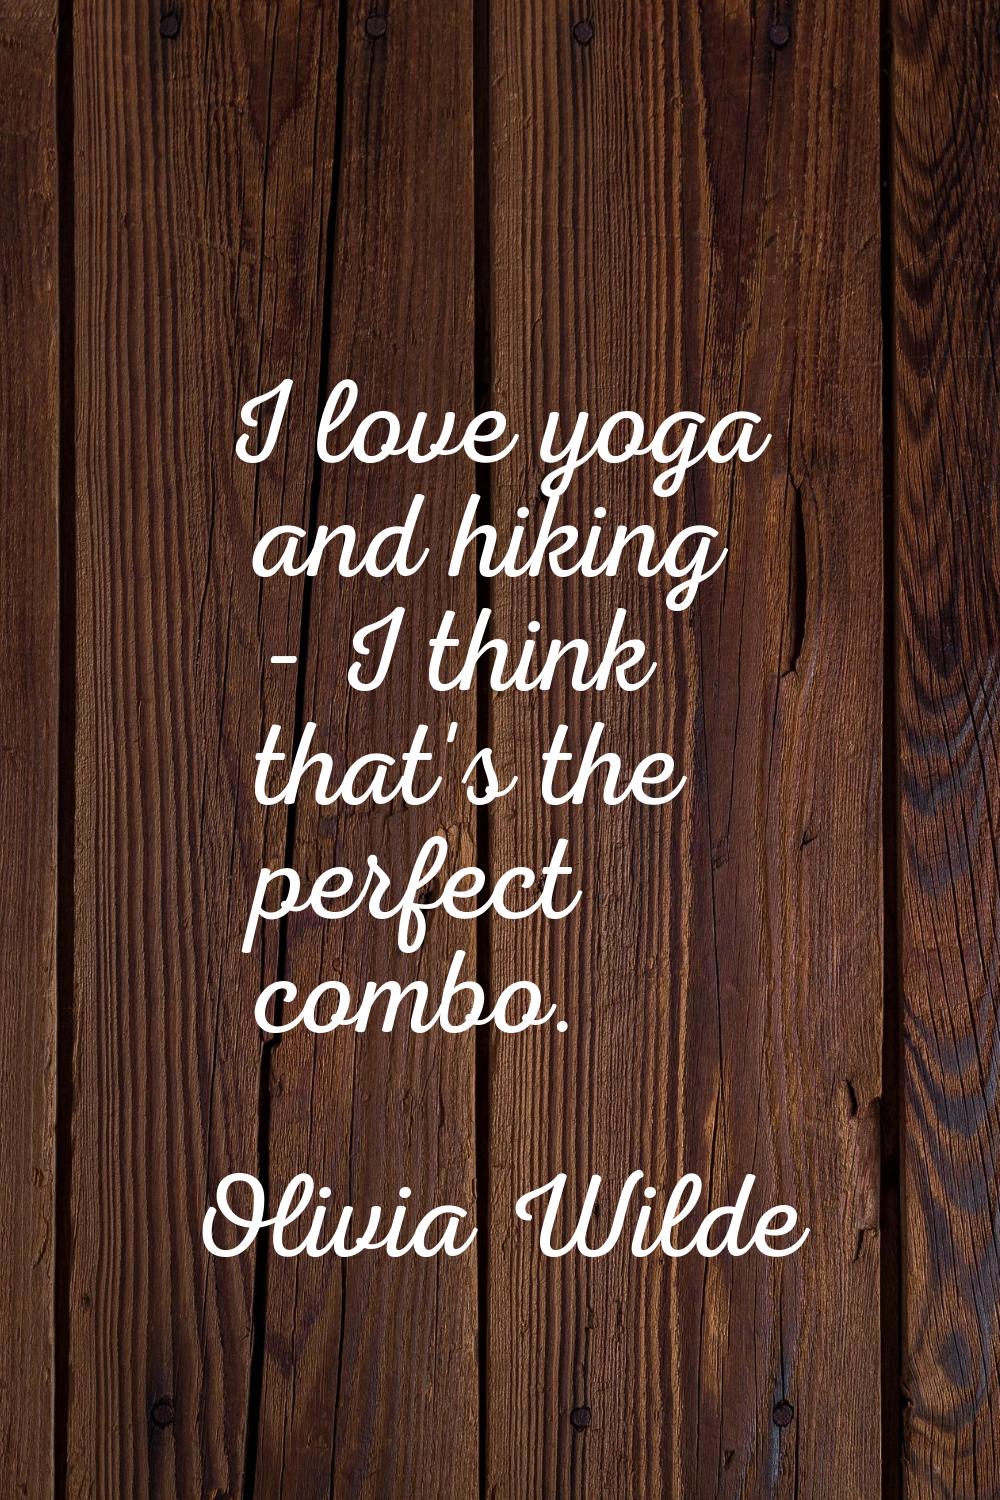 I love yoga and hiking - I think that's the perfect combo.